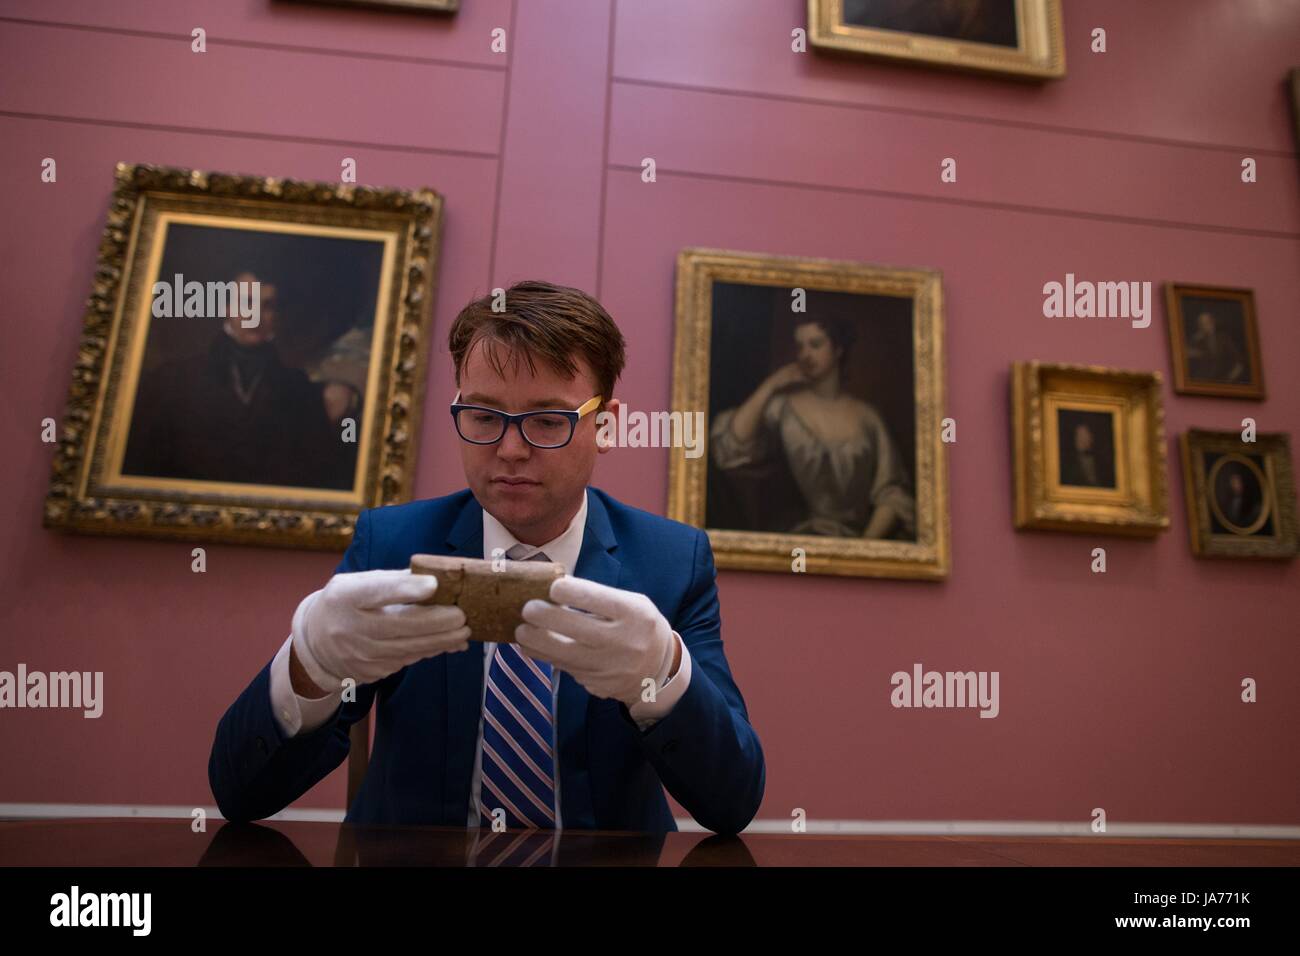 (170825) -- SYDENY, Aug. 25, 2017 (Xinhua) -- Photo taken on April 17, 2017 shows Dr. Daniel Mansfield, an Australian mathematician who deciphered the Babylonian clay tablet in New York, the United States. The mystery of a famous 3,700-year-old Babylonian clay tablet, once owned by the real 'Indiana Jones,' has been unlocked by Daniel Mansfield. It was revealed on Aug. 25, 2017. (Xinhua/University of New South Wales) (dtf) Stock Photo